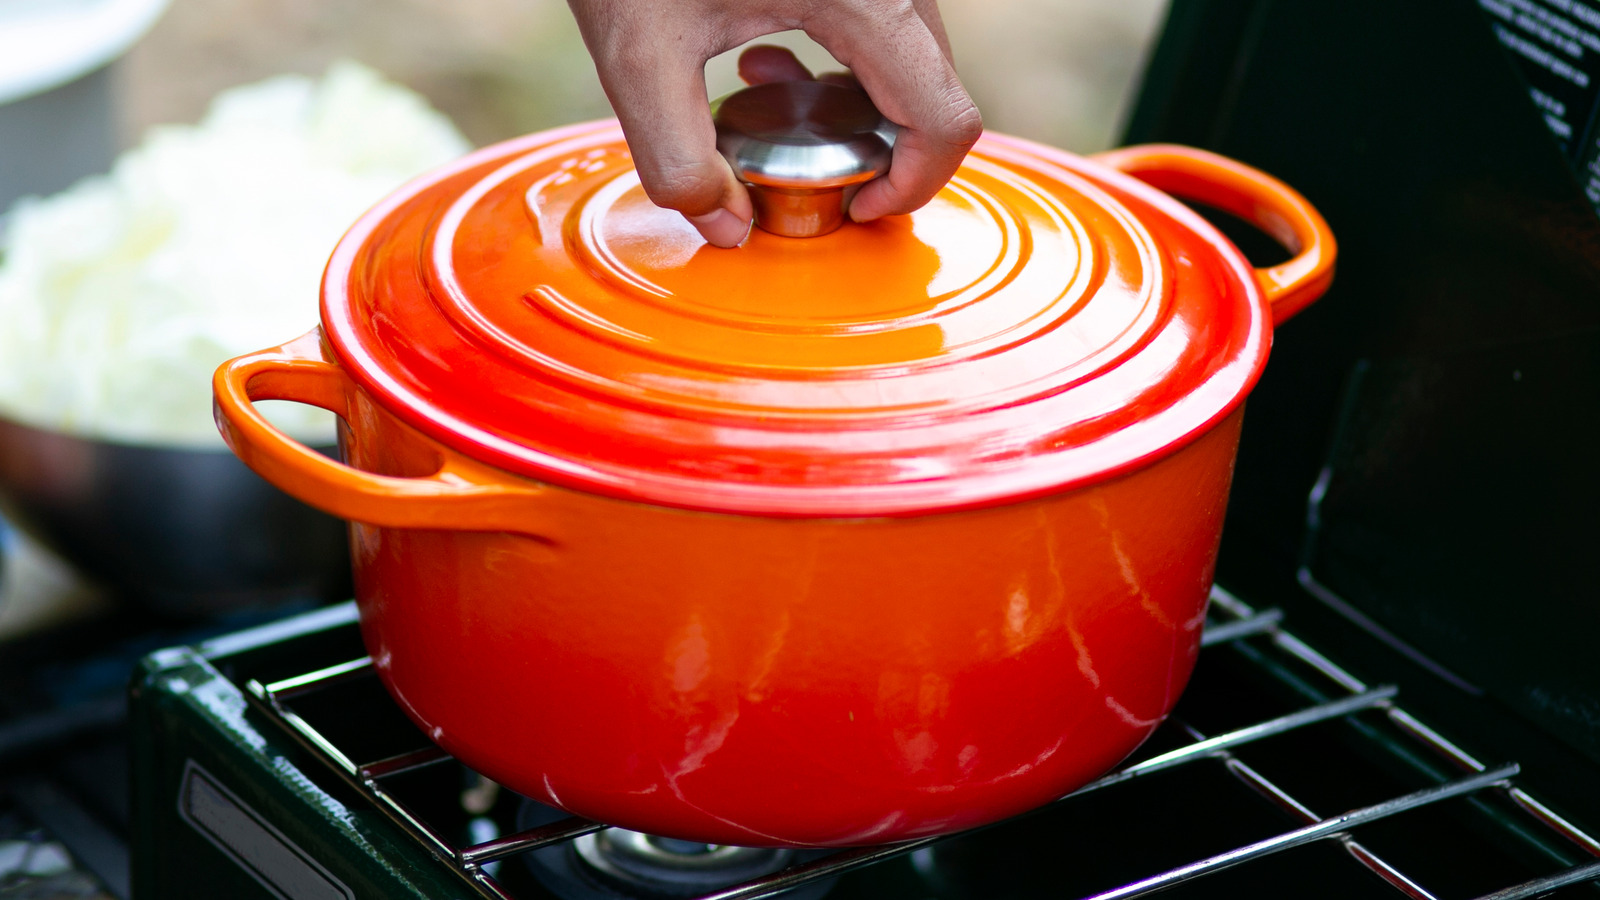 How to Clean a Dutch Oven